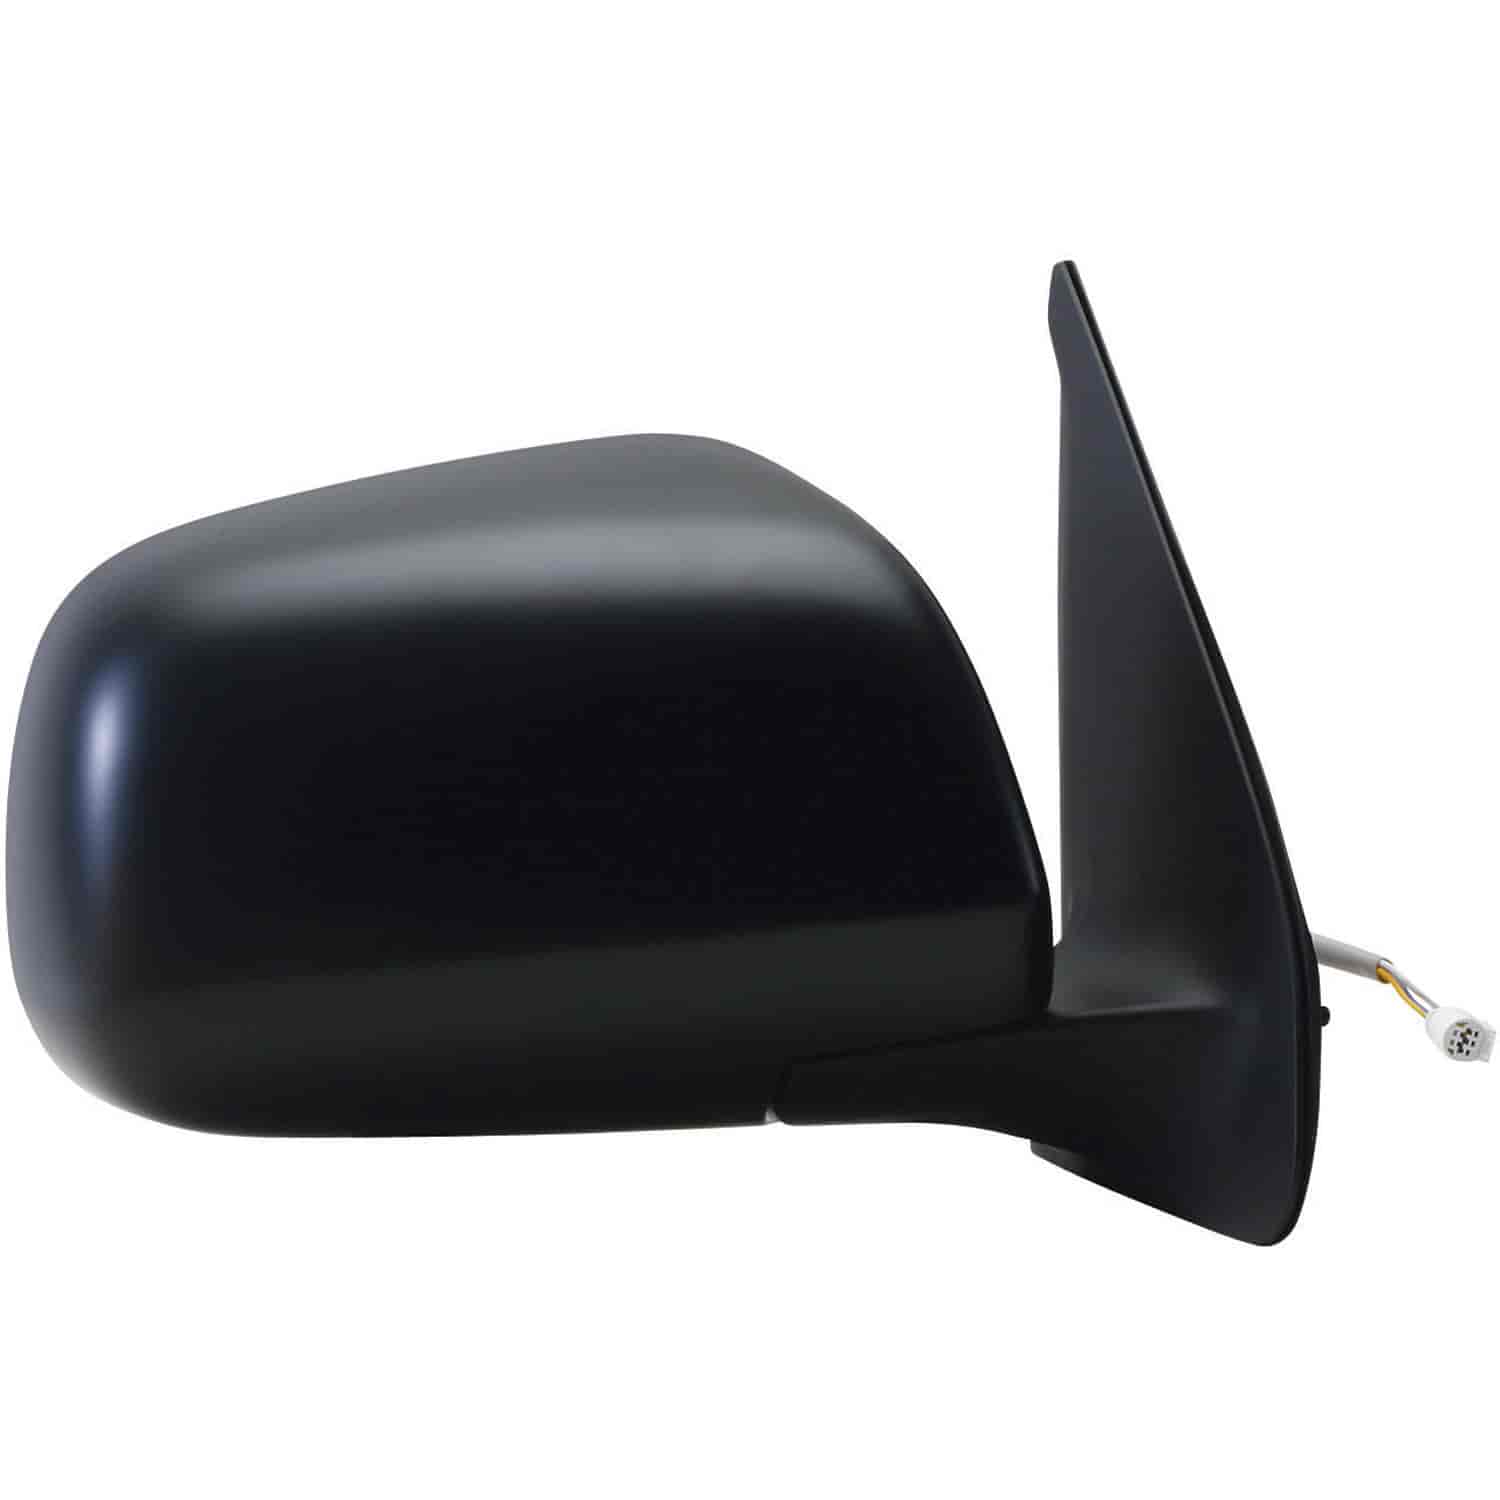 OEM Style Replacement mirror for 05-14 Toyota Tacoma Crew Cab passenger side mirror tested to fit an